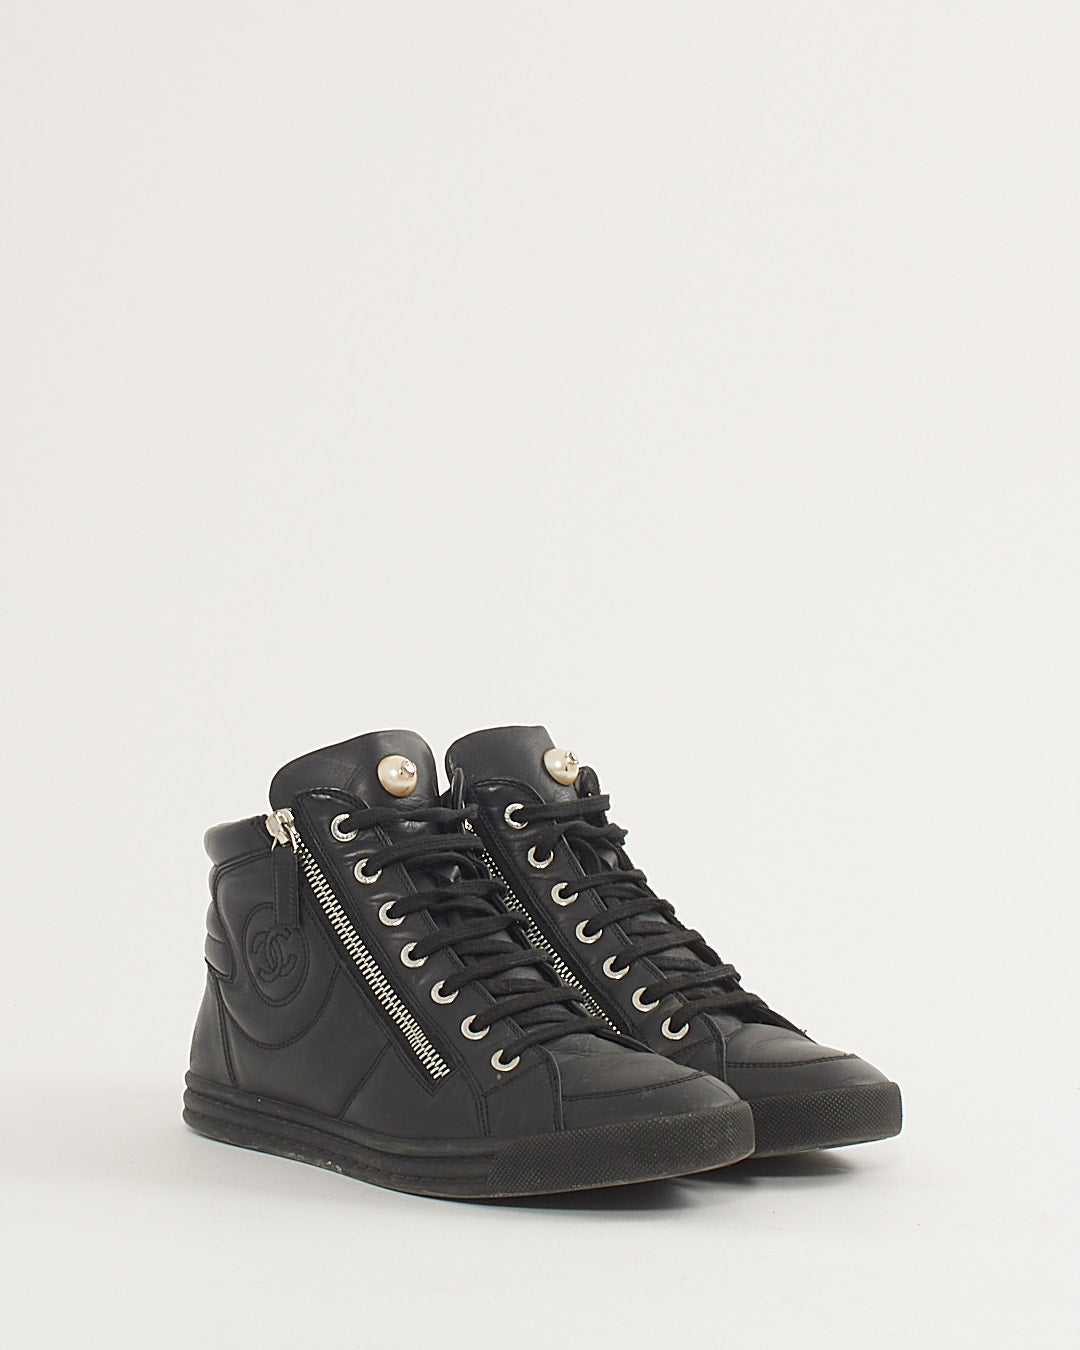 Chanel Black Leather Logo High-Top Sneakers - 38